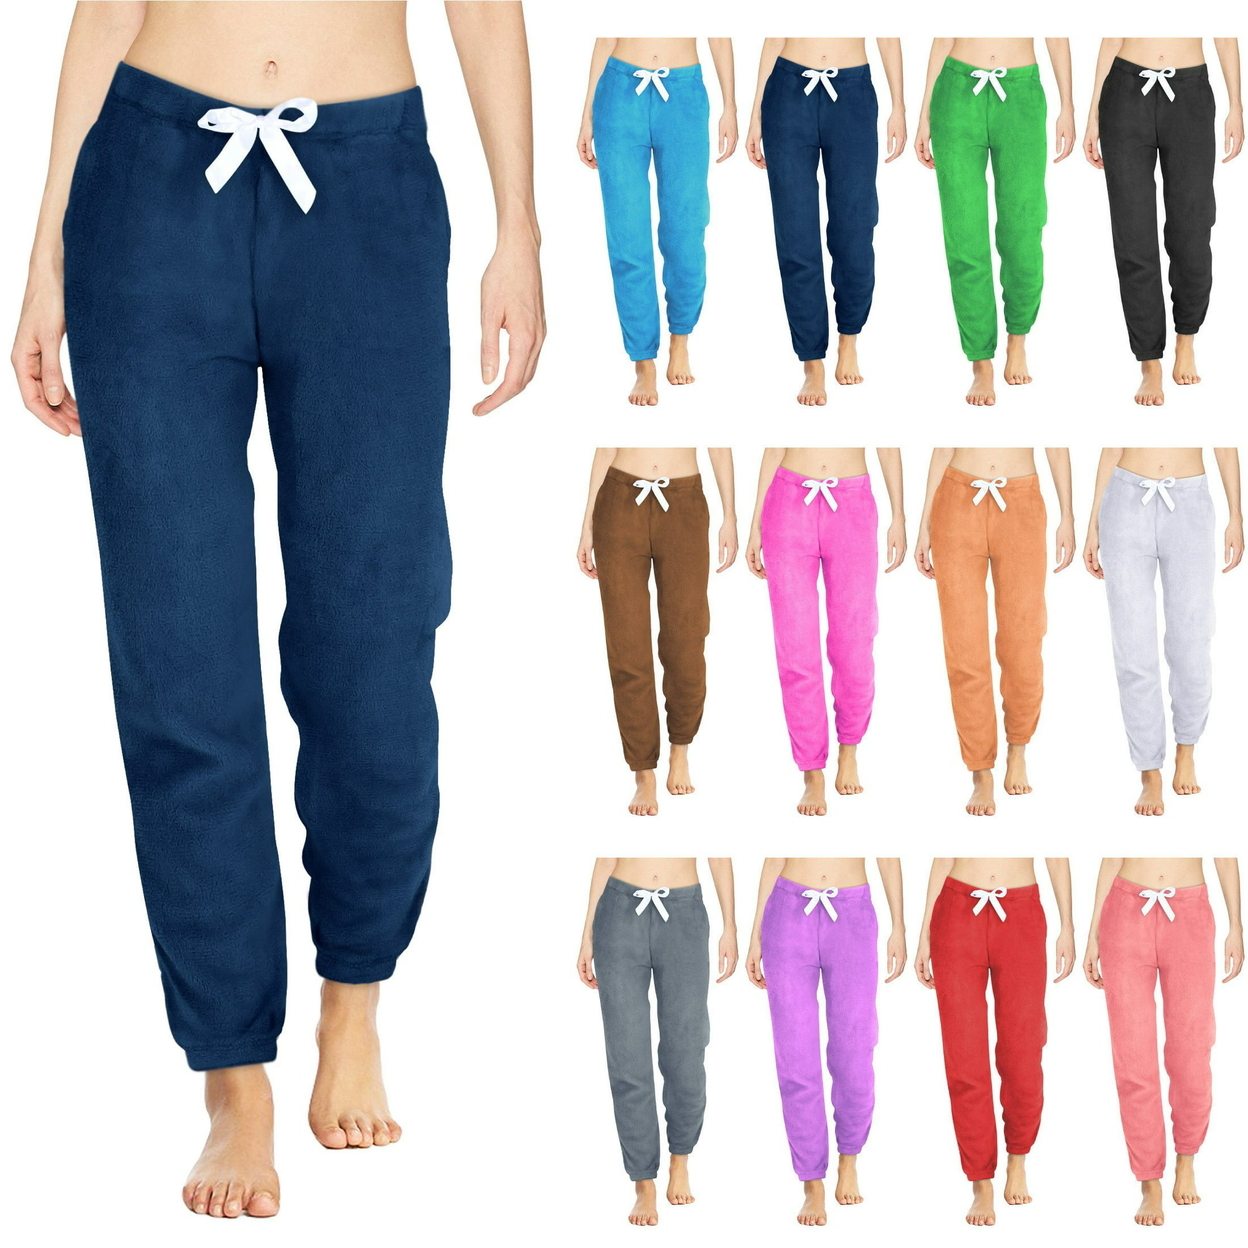 Multi-Pack: Women's Solid & Printed Ultra-Soft Comfy Stretch Micro-Fleece Pajama Lounge Pants - 1-pack, Small, Animal